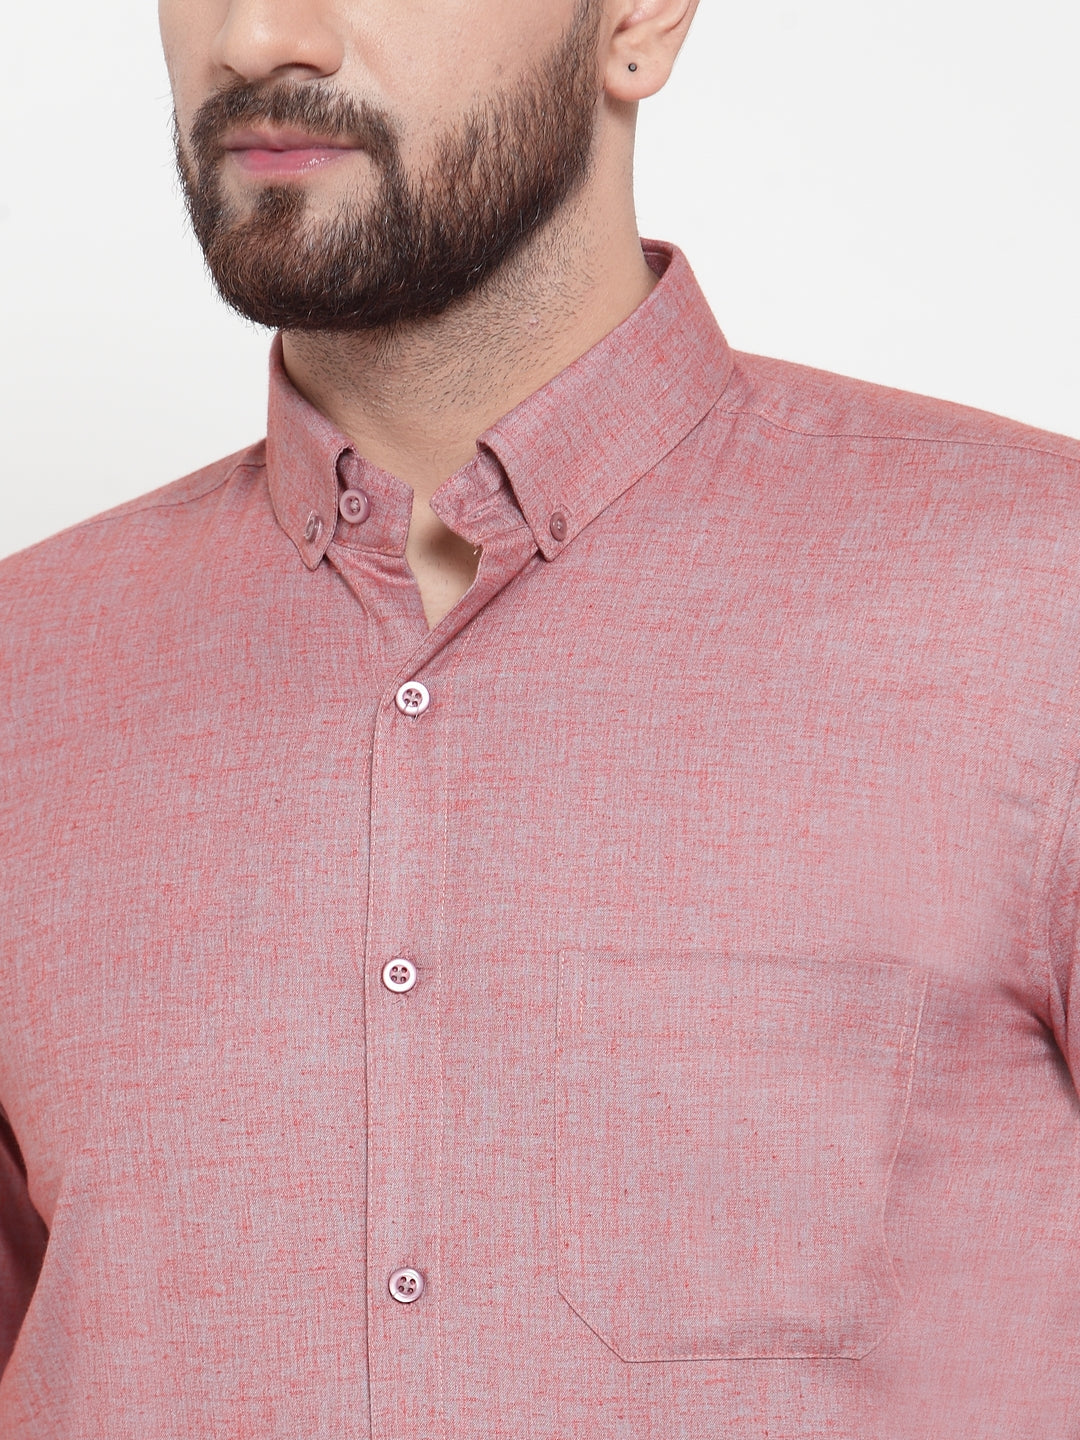 Men's Coral Cotton Solid Button Down Formal Shirts ( SF 753Coral ) - Jainish